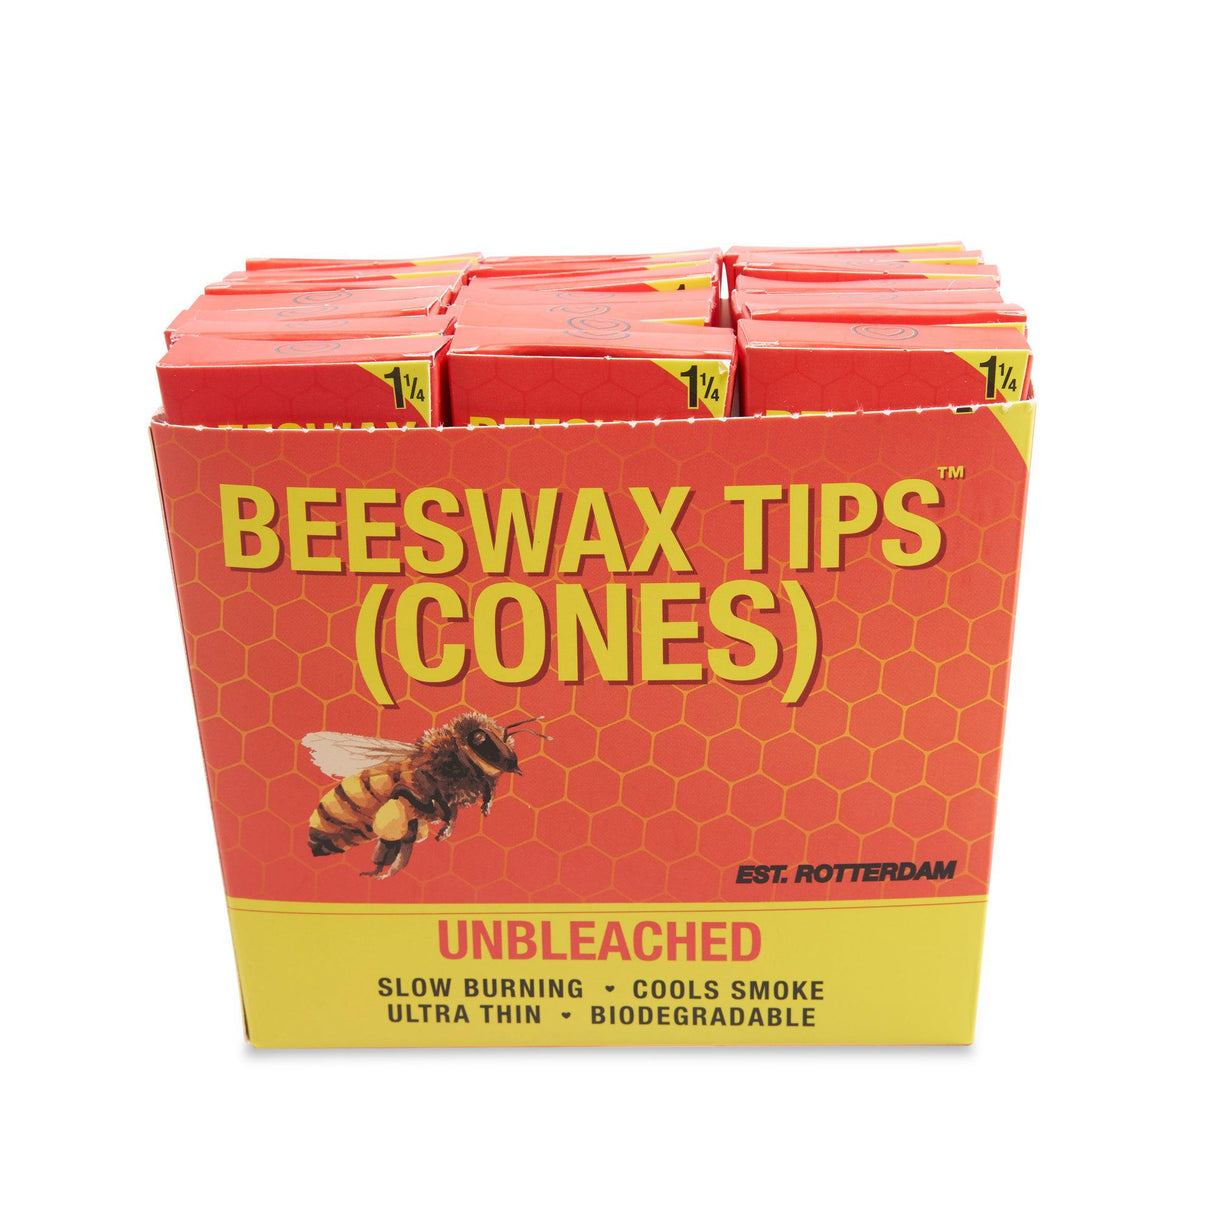 Bloomer 1 1/4 Cones with Beeswax Tips - 21ct Display